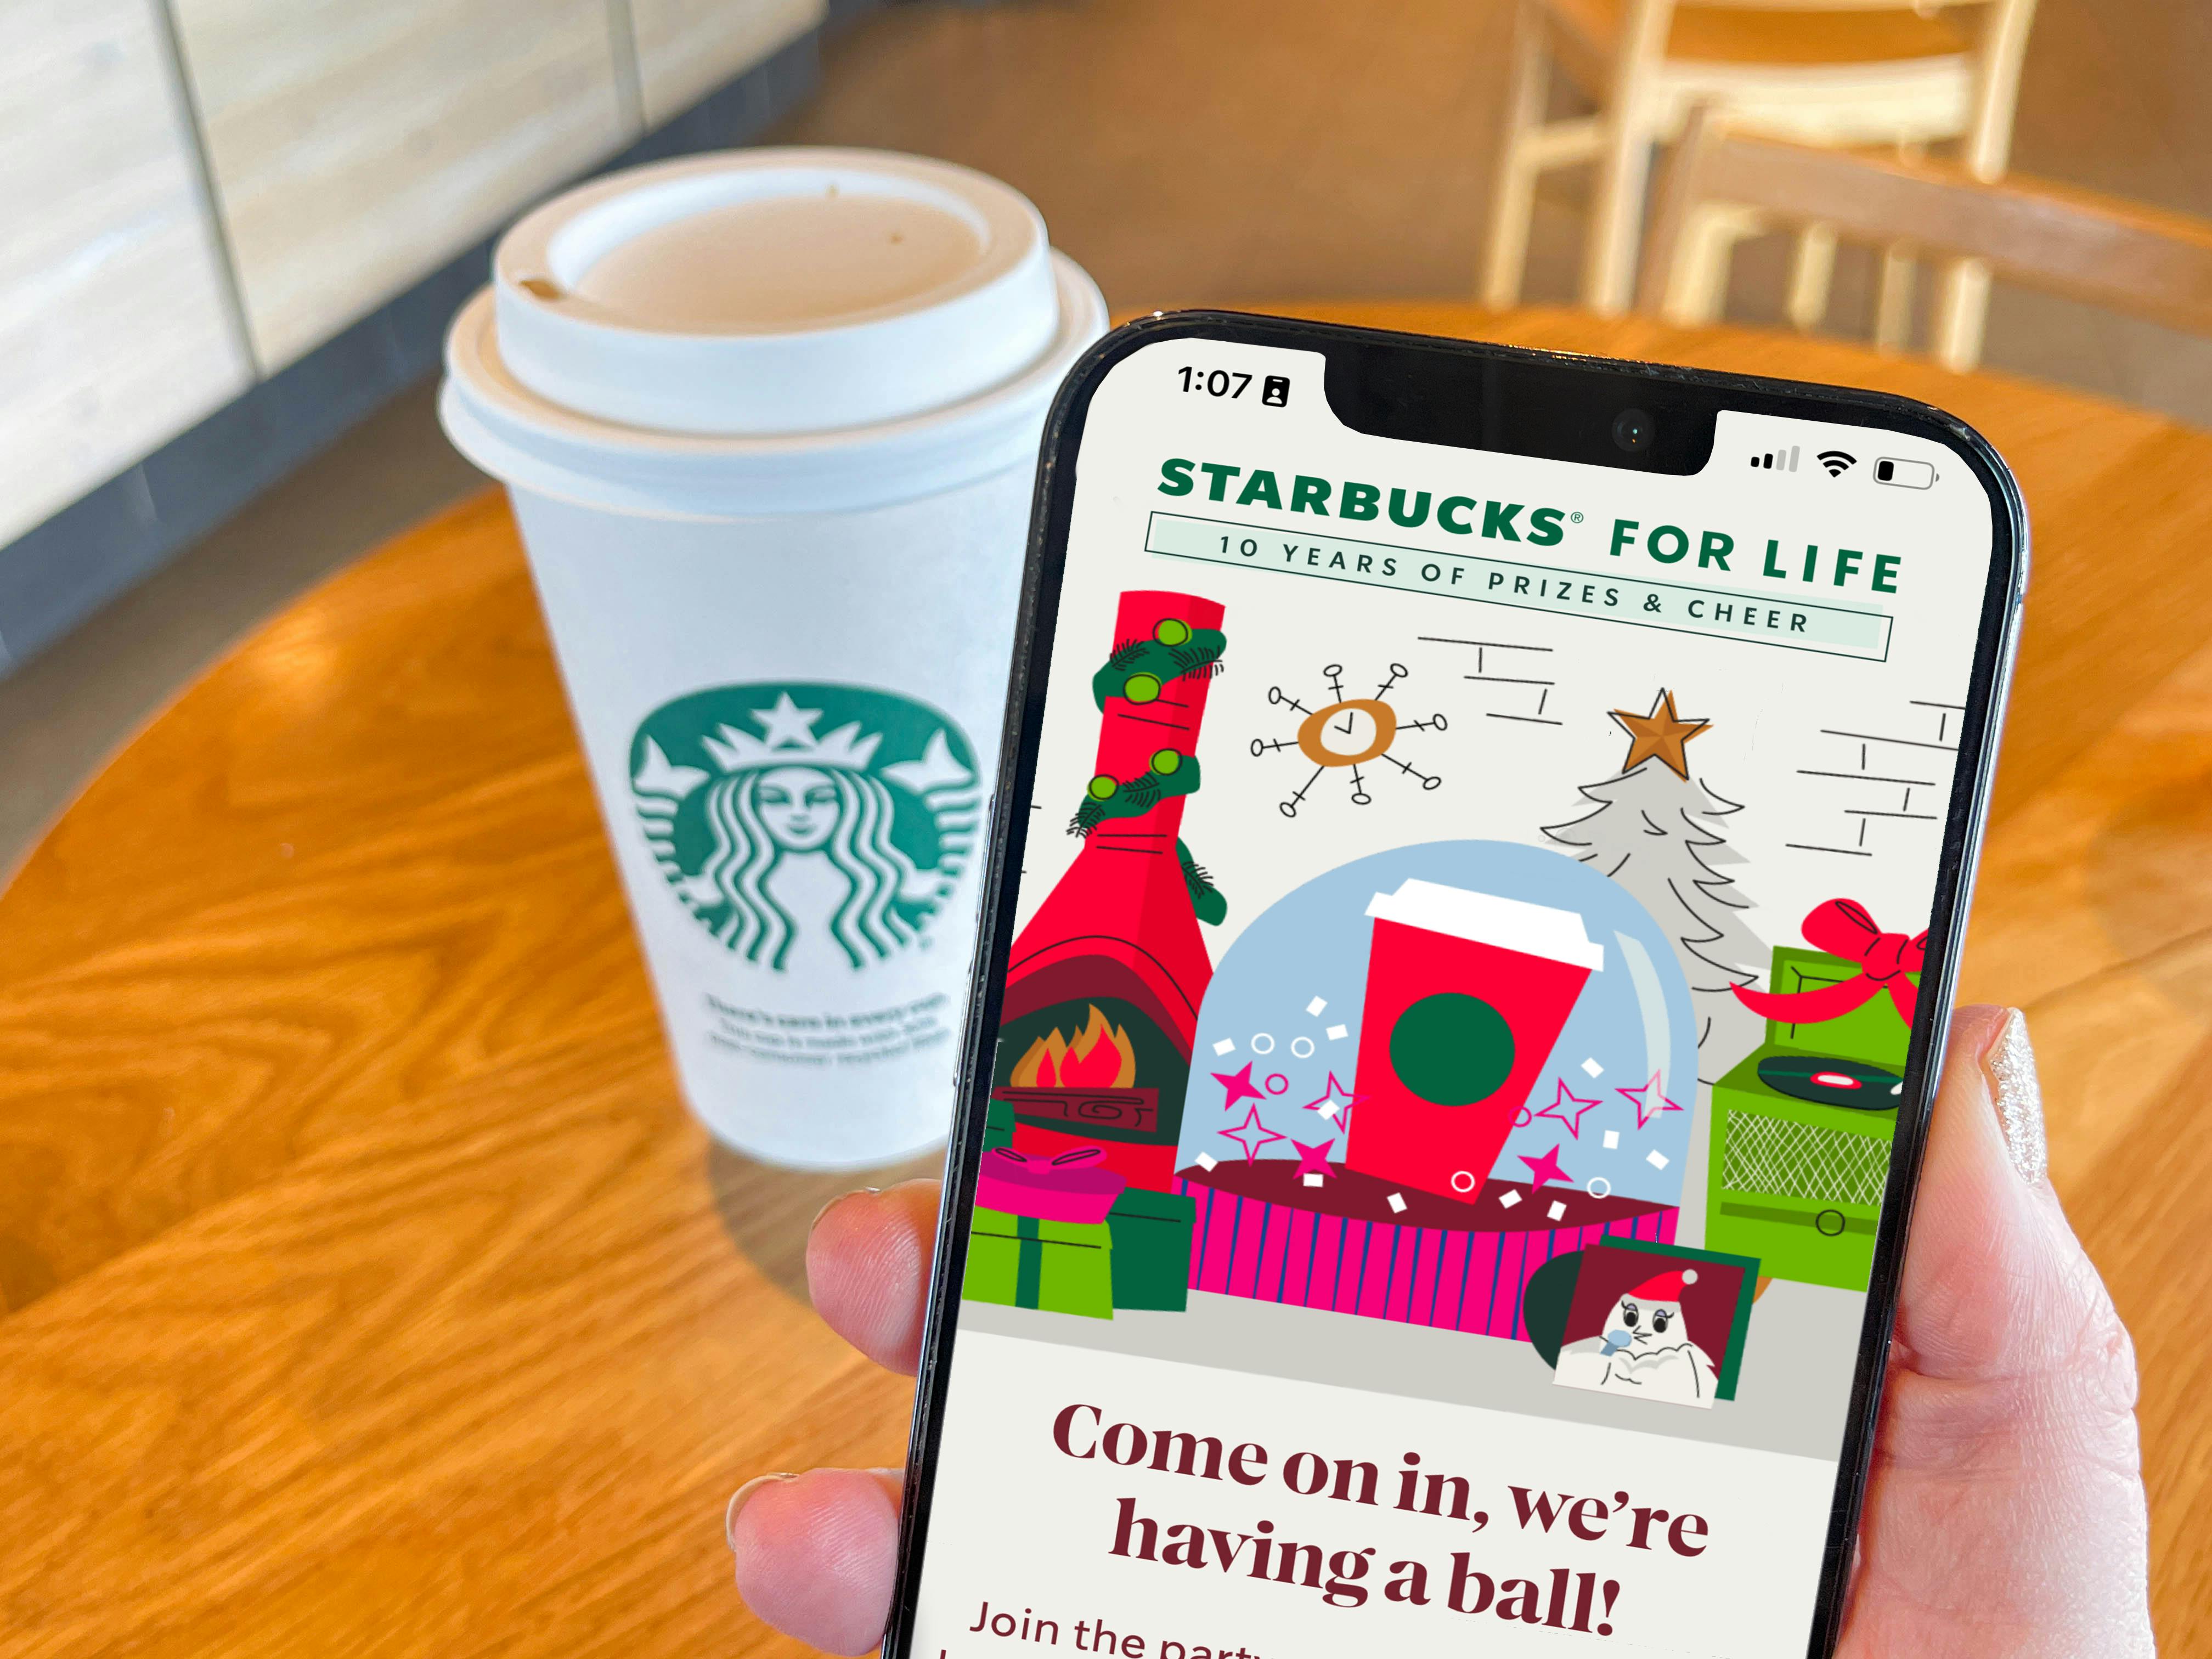 Use This Starbucks Refill Cup to Get Free Coffee All January Long - The  Krazy Coupon Lady